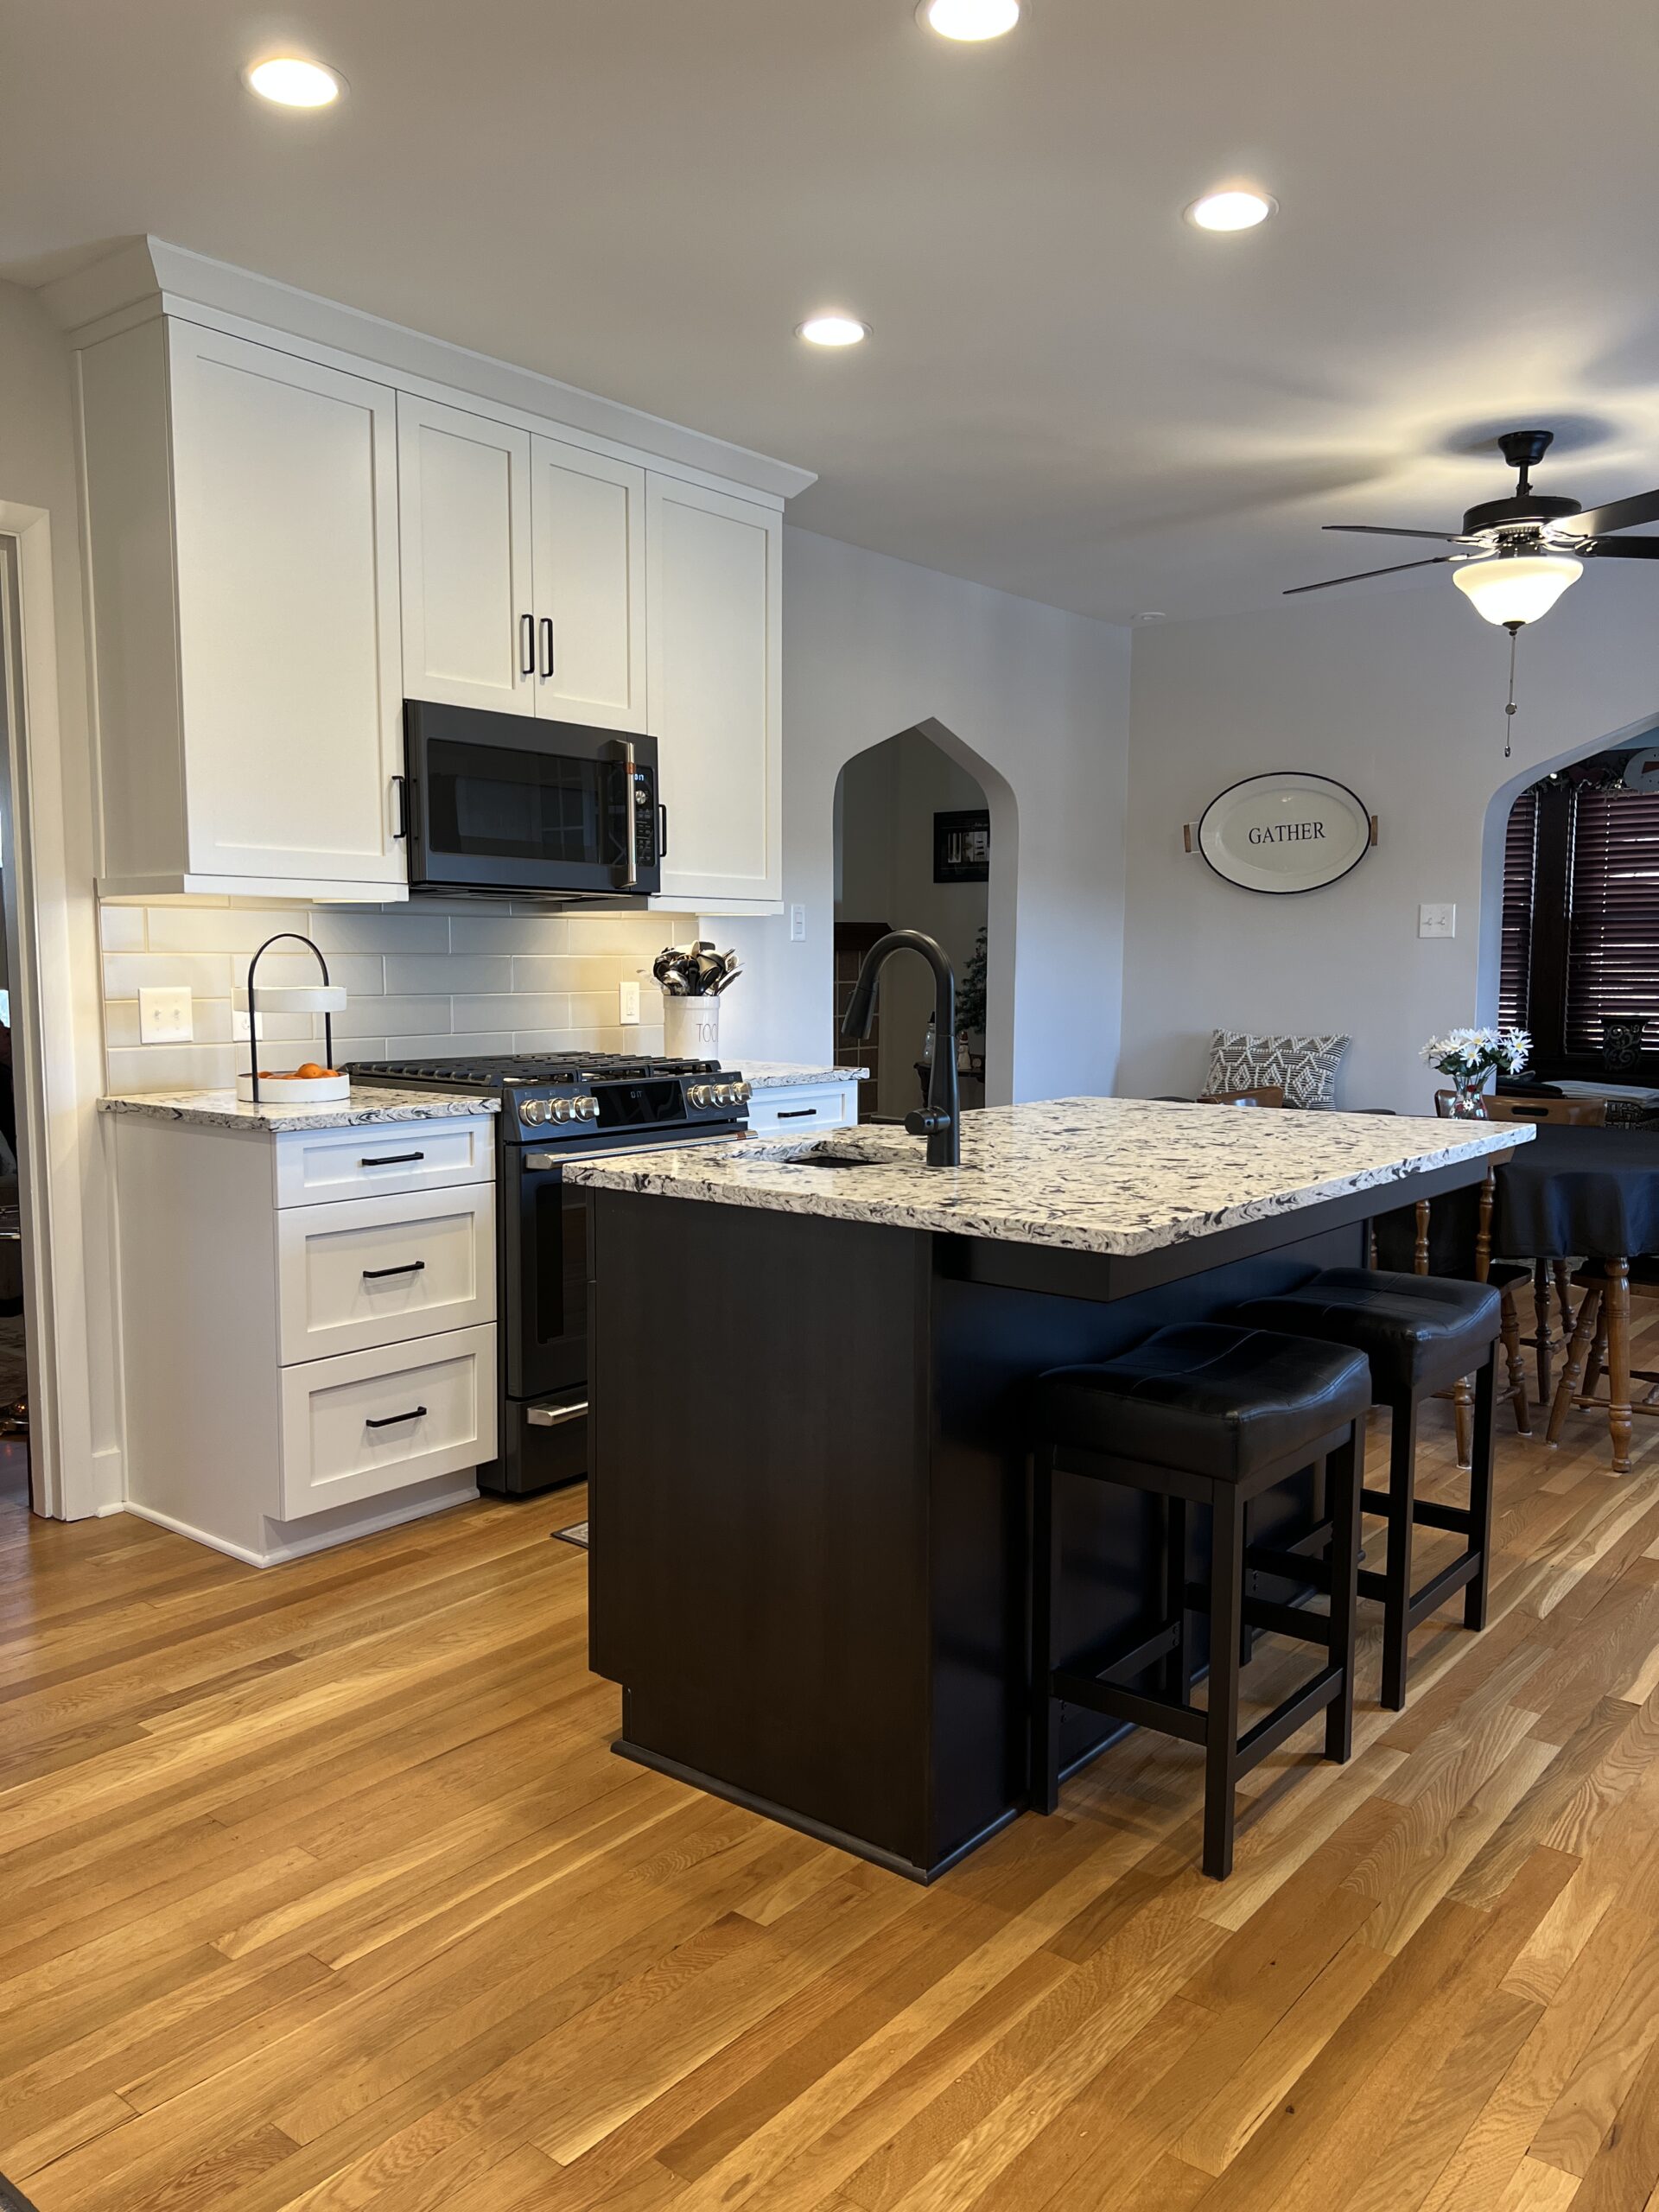 Modern black and white kitchen, black island with black and white marble countertop, white wall and base cabinets, light brown floors, butlers pantry